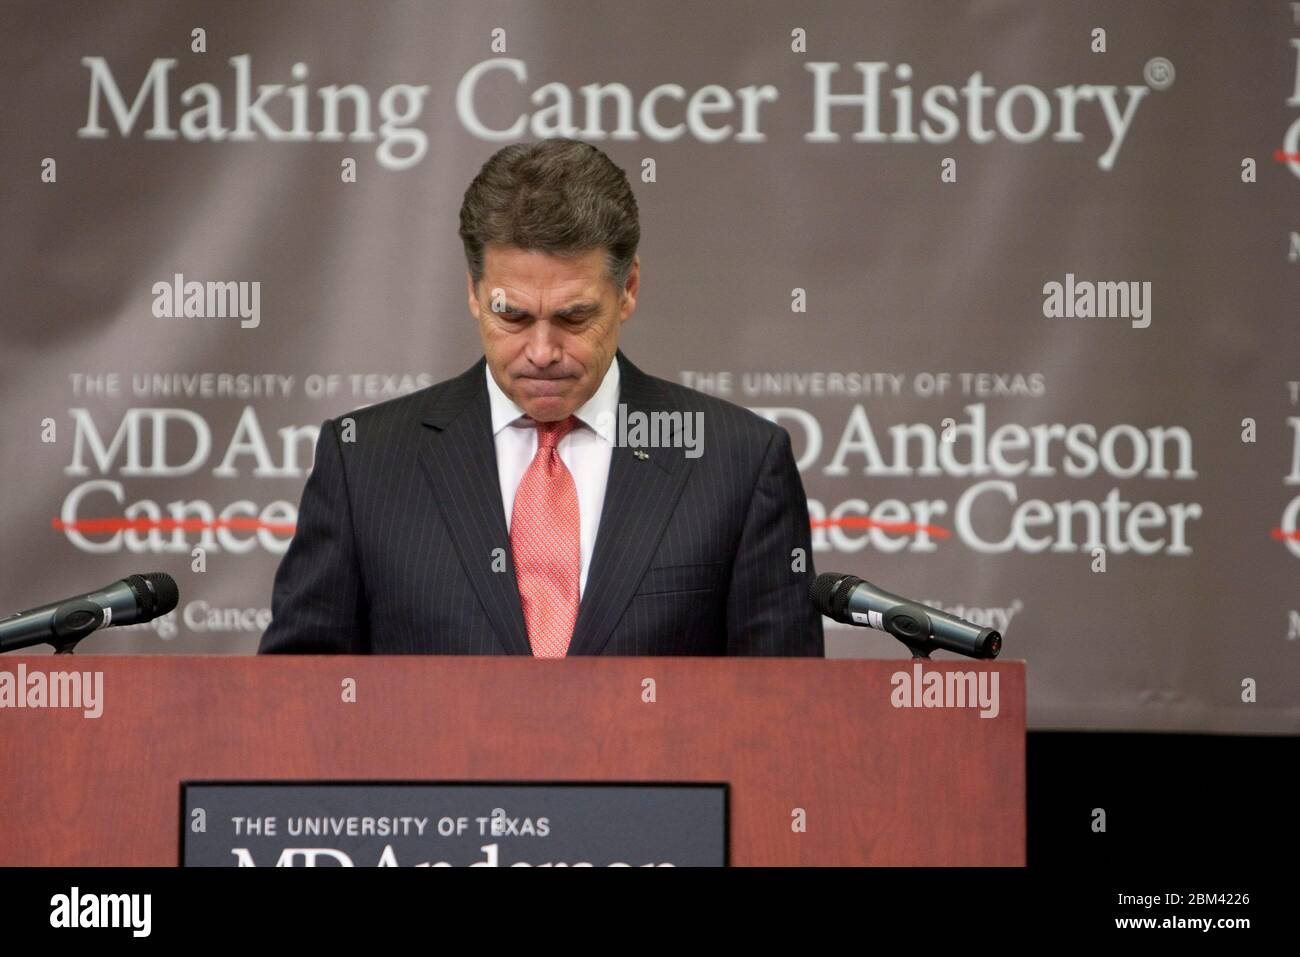 Houston Texas USA, November 28, 2011: Texas Gov. Rick Perry at announcement of new Institute for Applied Cancer Science at The University of Texas MD Anderson Cancer Center. © Marjorie Kamys Cotera/Daemmrich Photography Stock Photo